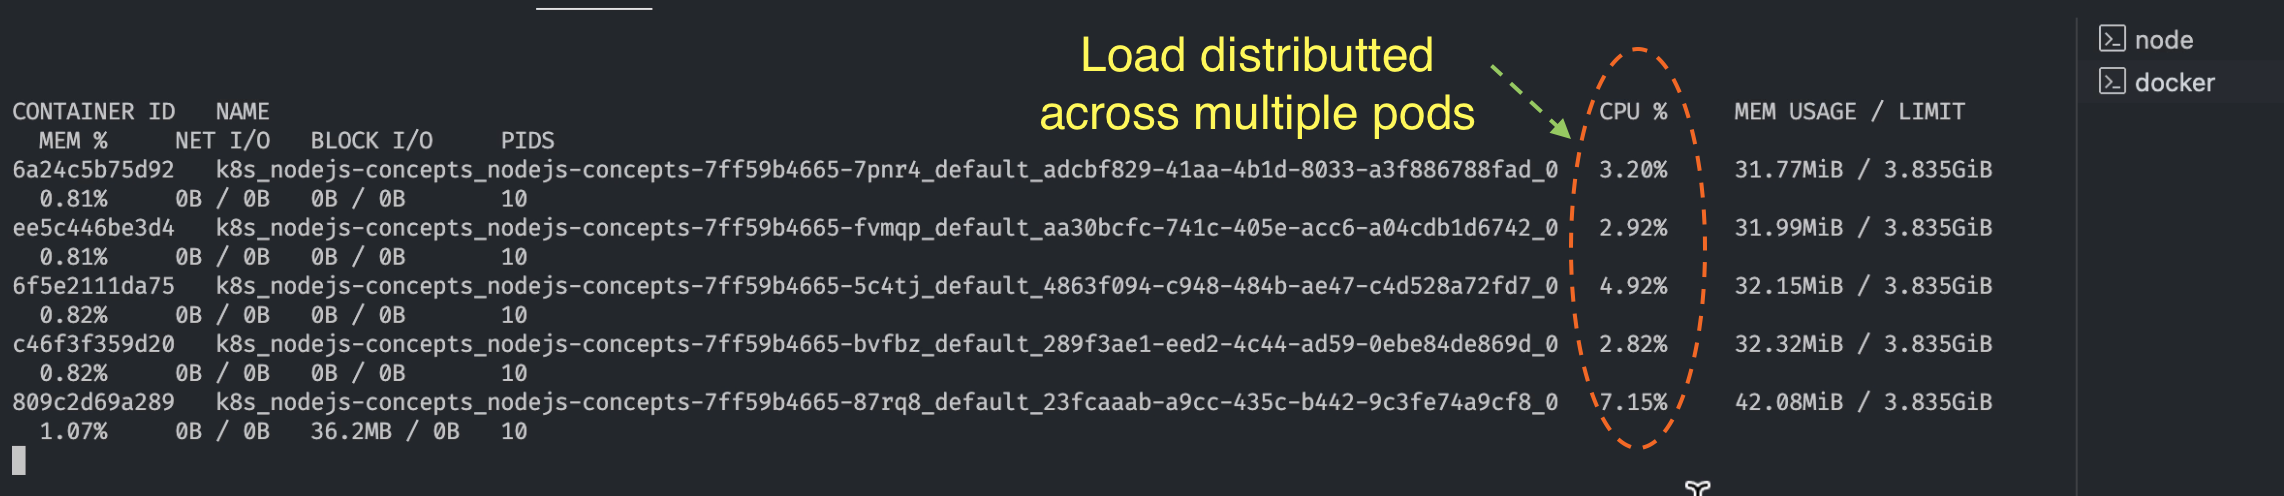 Load-distribuuted-across-pods.png